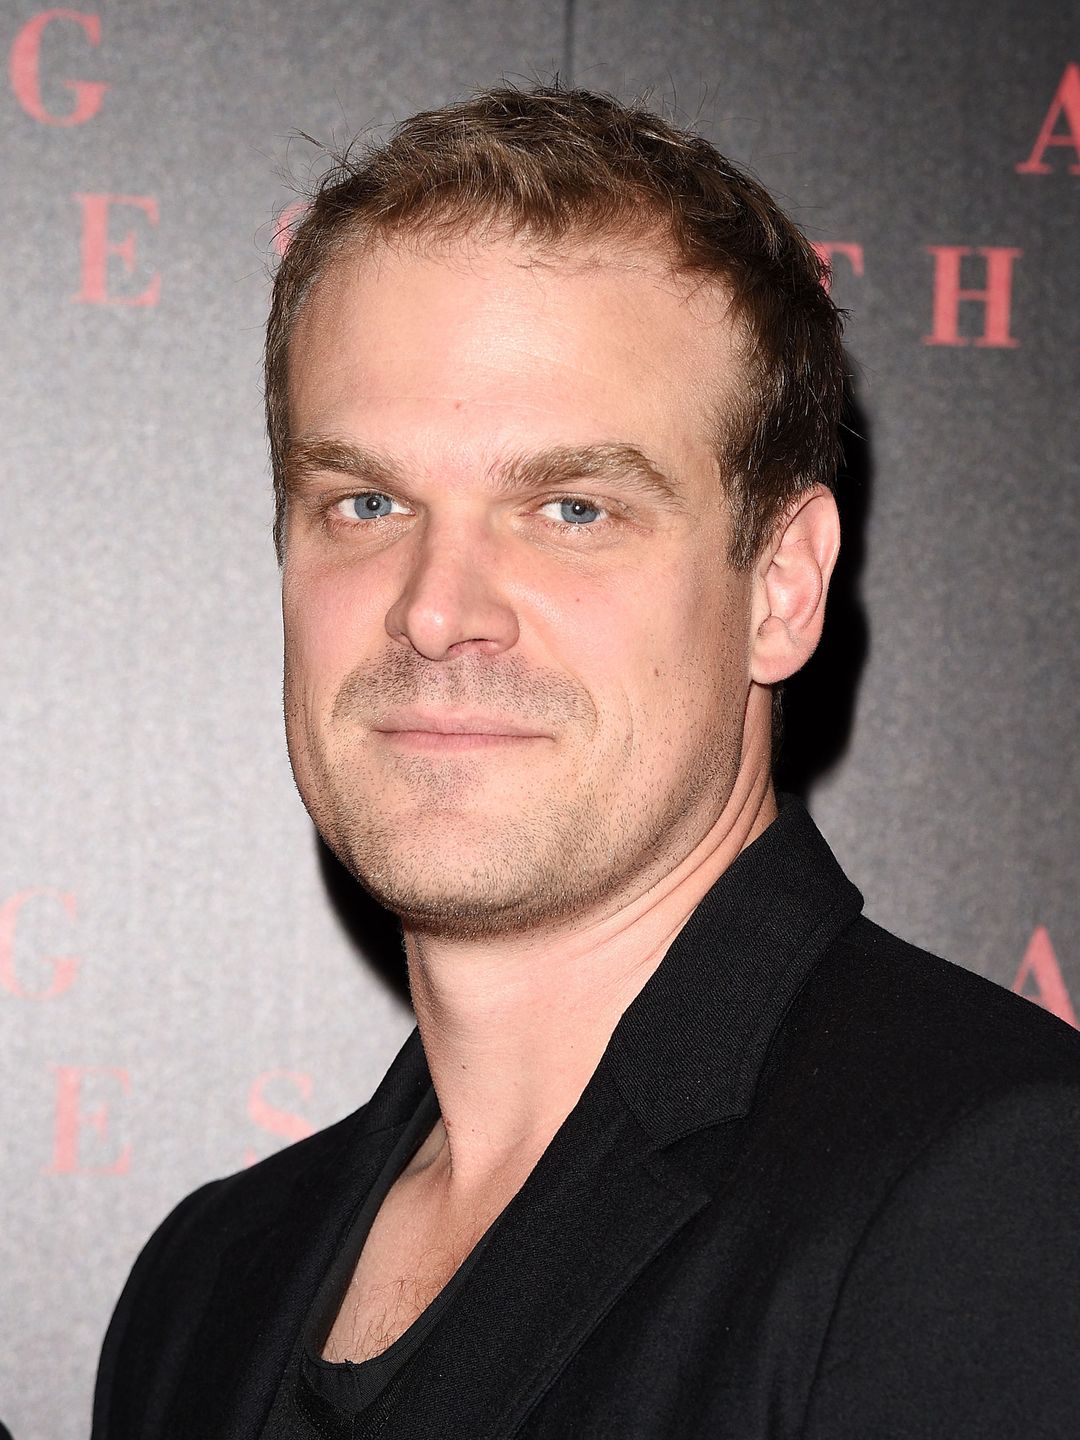 David Harbour in real life